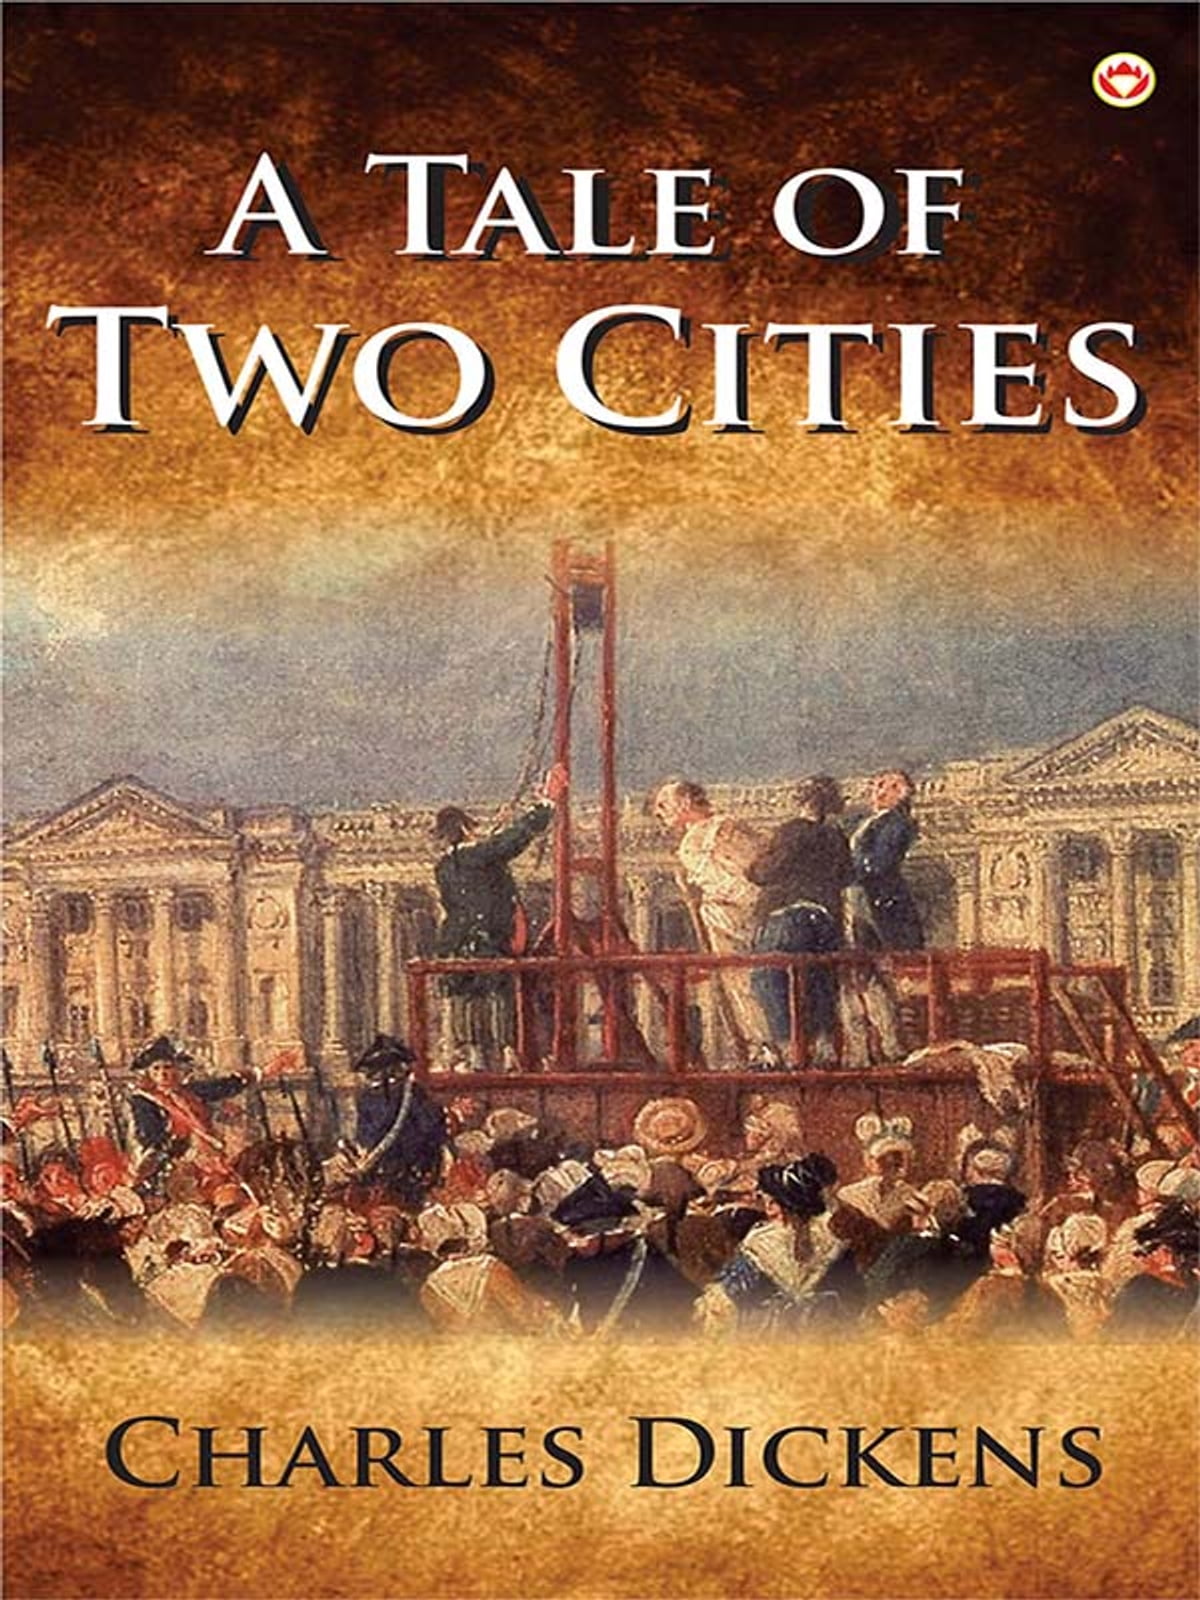 book review on a tale of two cities